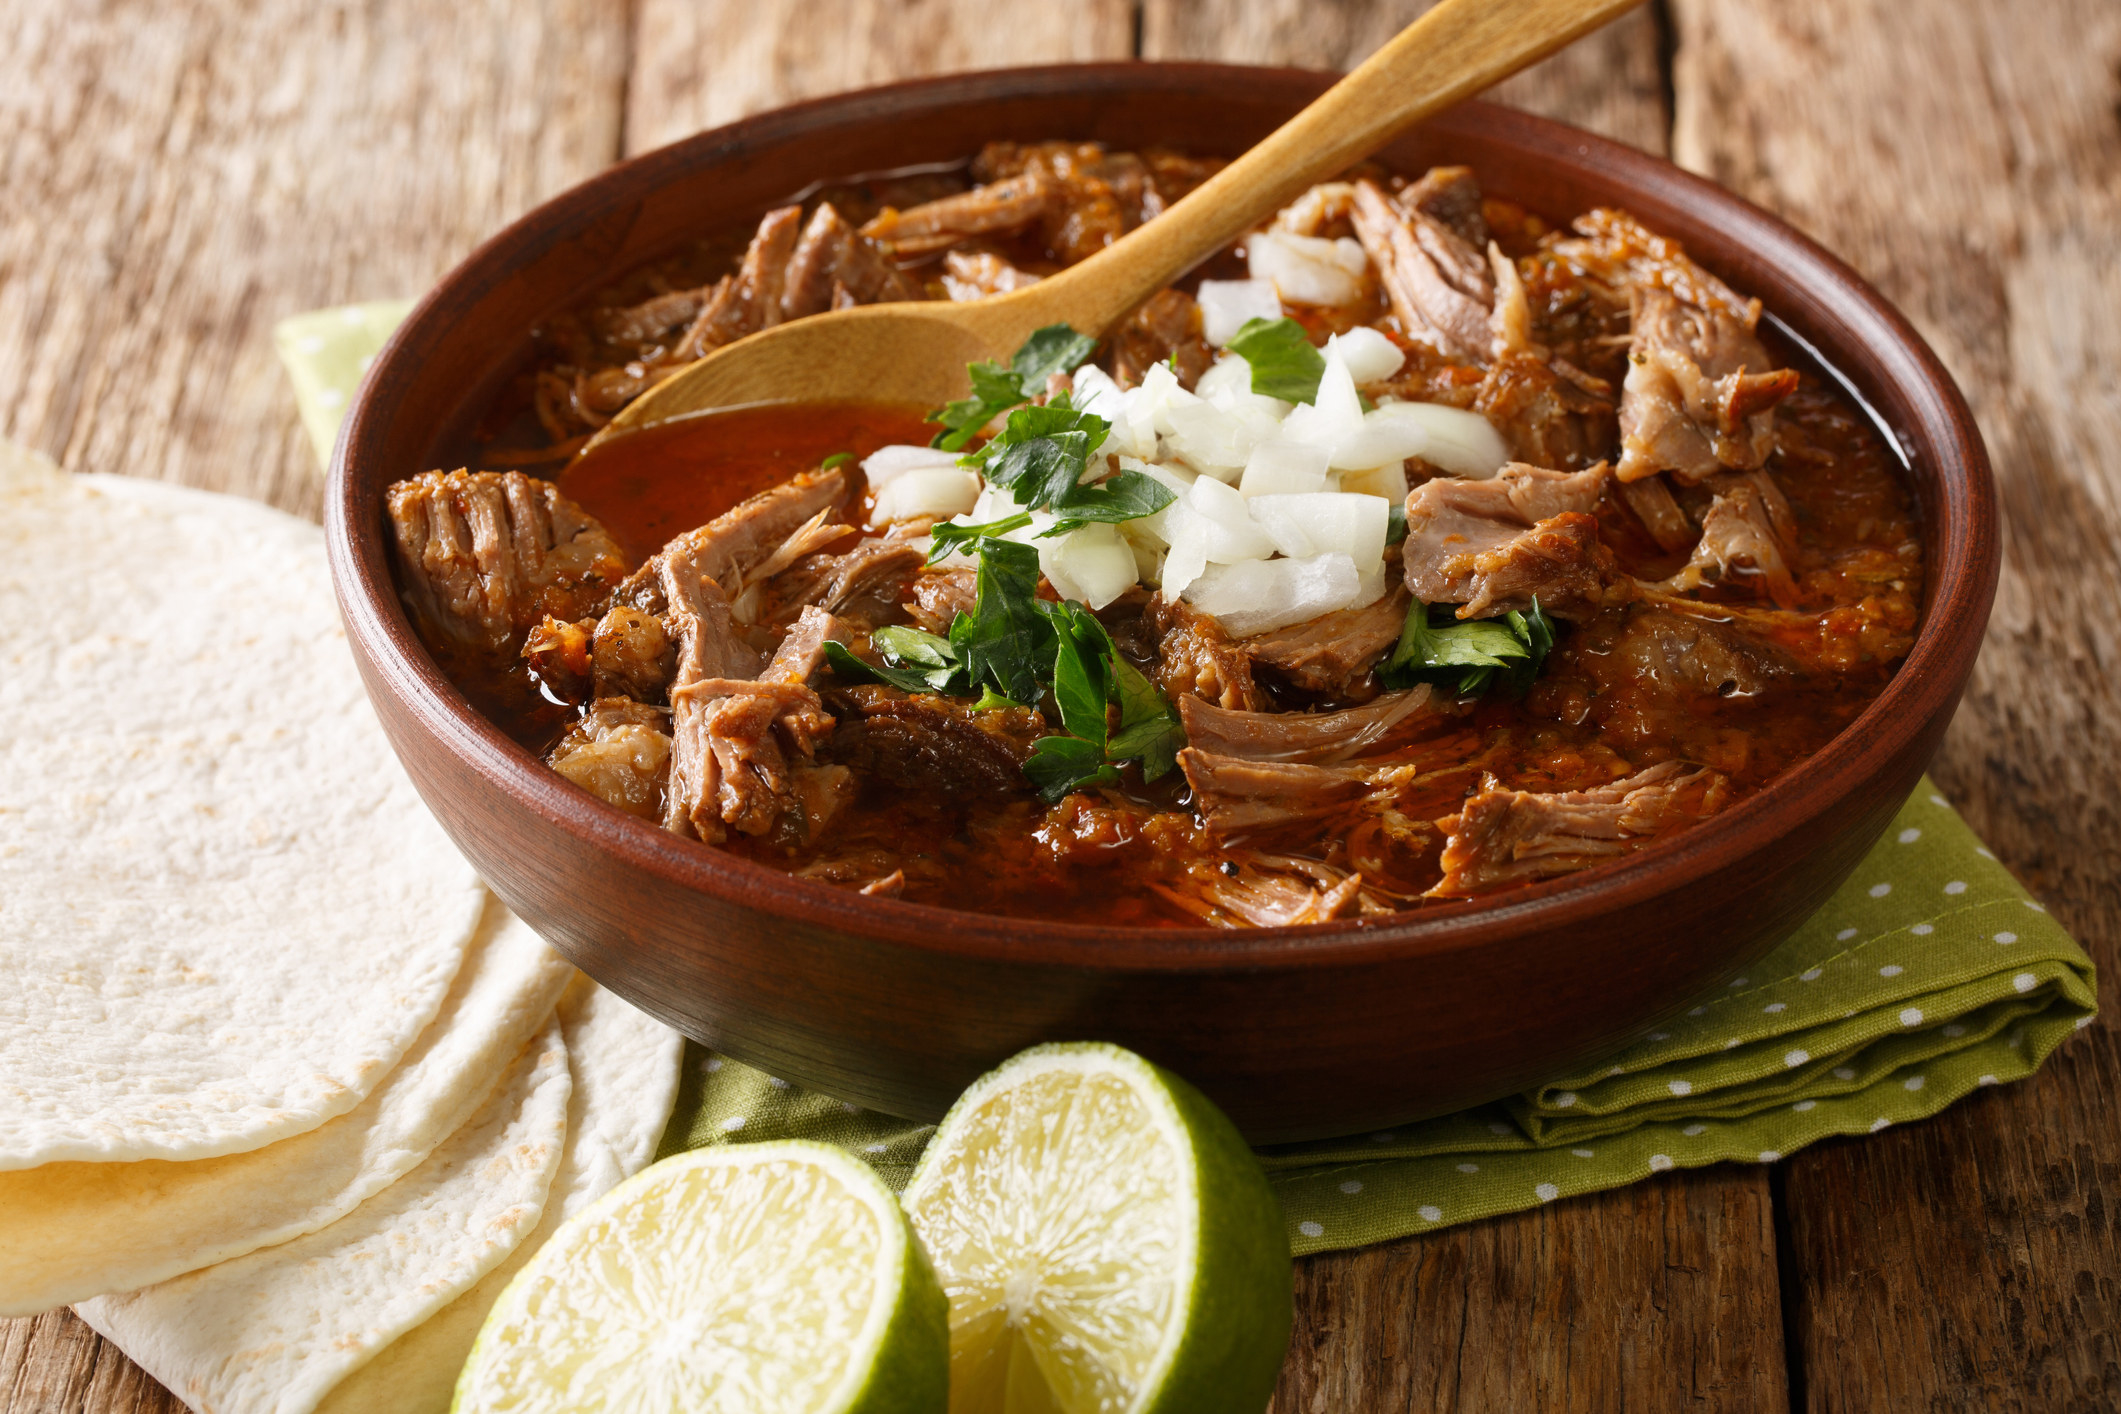 bowl of birria meat with tortillas on the side